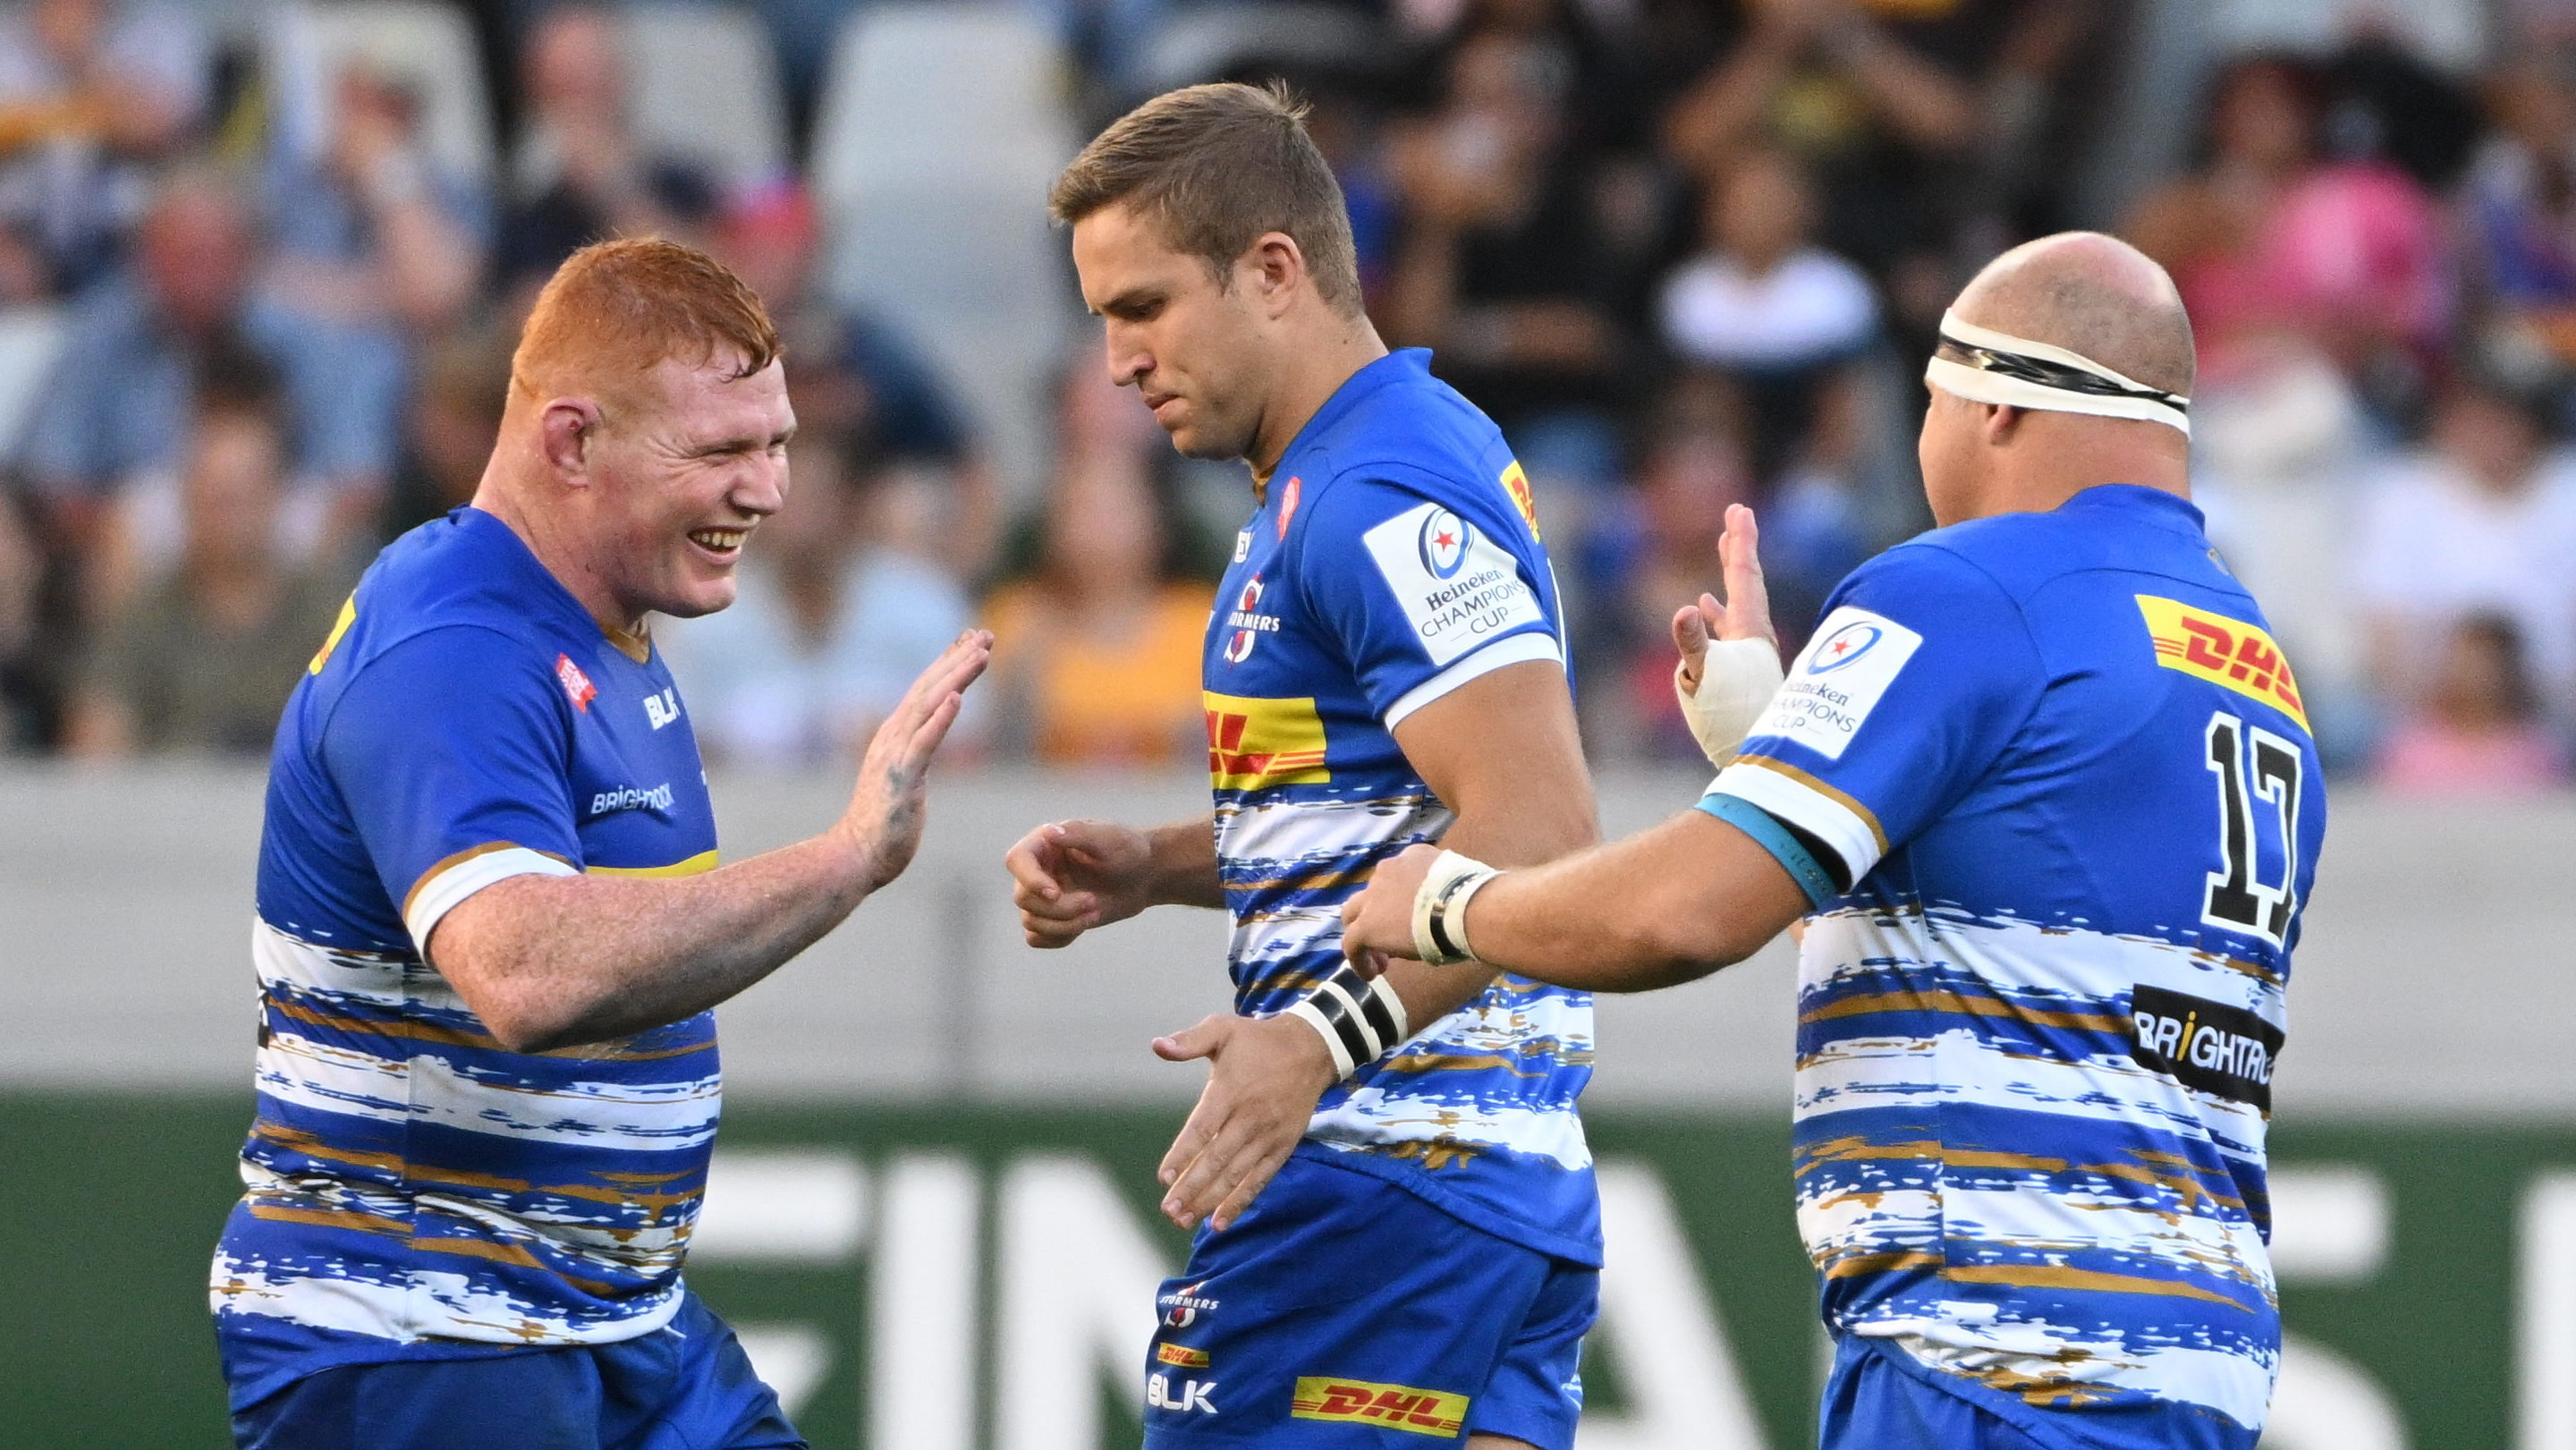 Heineken Champions Cup Round of 16, DHL Stadium, Cape Town, South Africa 1/4/2023 DHL Stormers vs Harlequins Steven Kitshoff (c) of the DHL Stormers welcomes Brok Harris of the DHL Stormers onto the field Mandatory Credit ©INPHO/Steve Haag Sports/Thinus Maritz